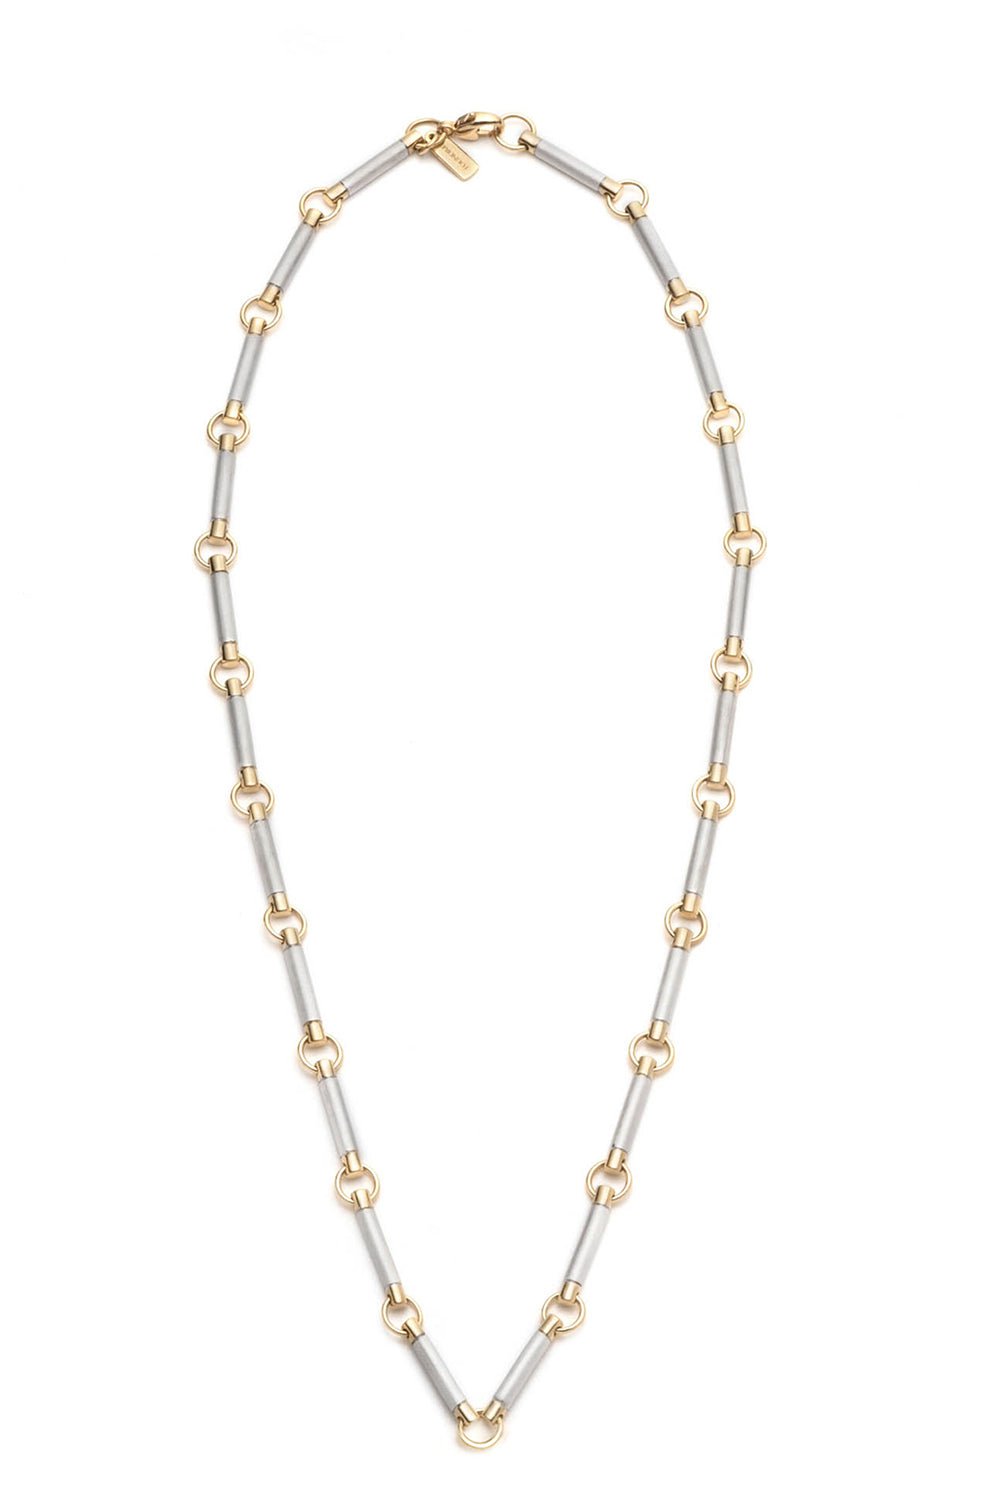 FOUNDRAE-Element Chain Choker Necklace-WHITE GOLD